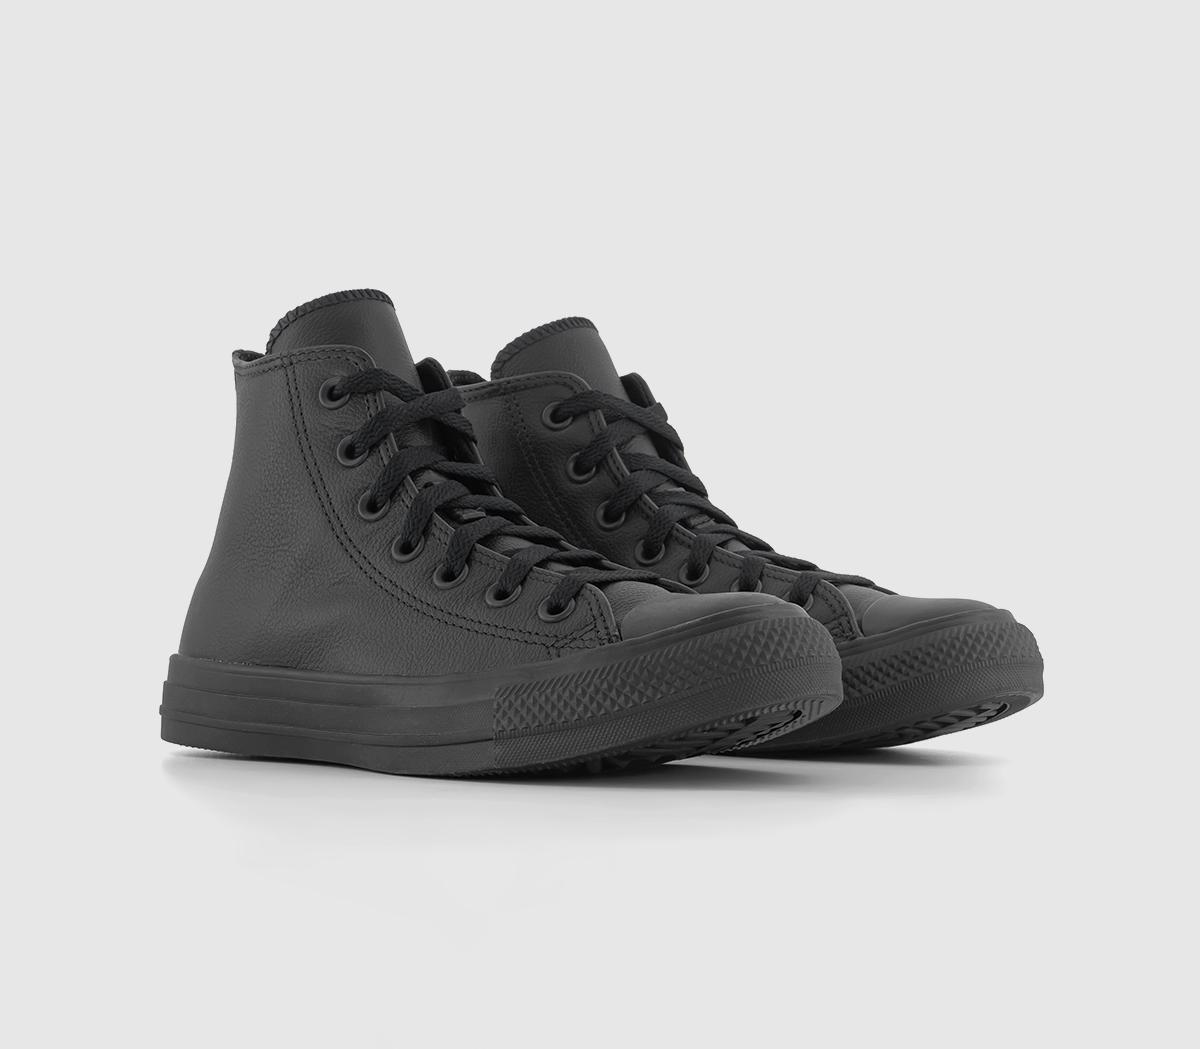 Converse Black Leather Classic All Star High Trainers, 11